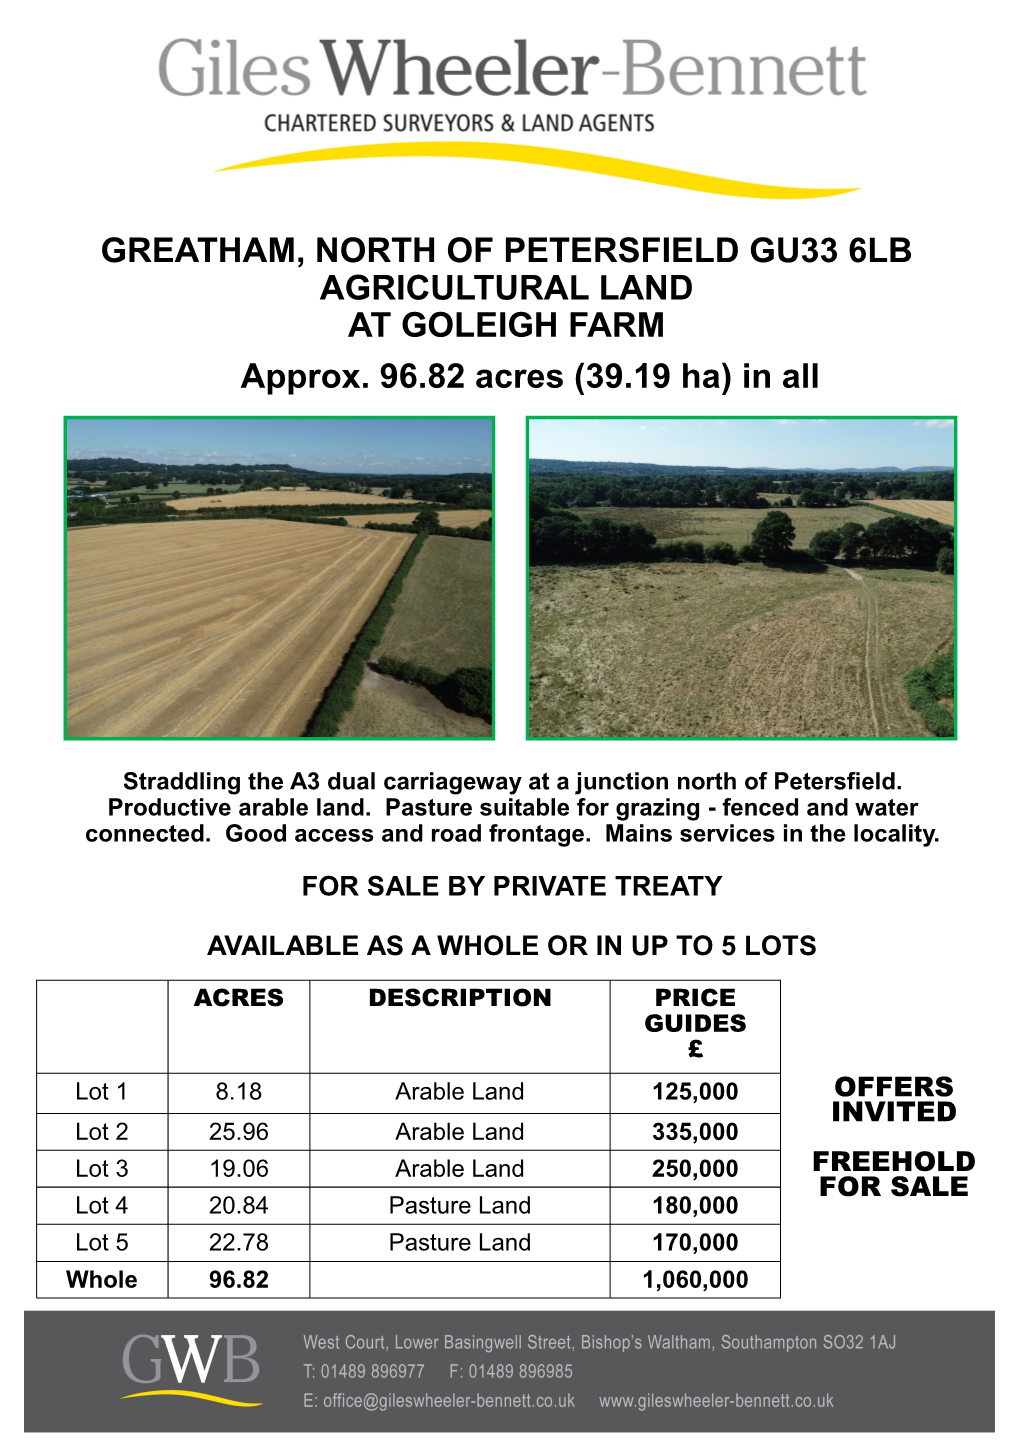 GREATHAM, NORTH of PETERSFIELD GU33 6LB AGRICULTURAL LAND at GOLEIGH FARM Approx